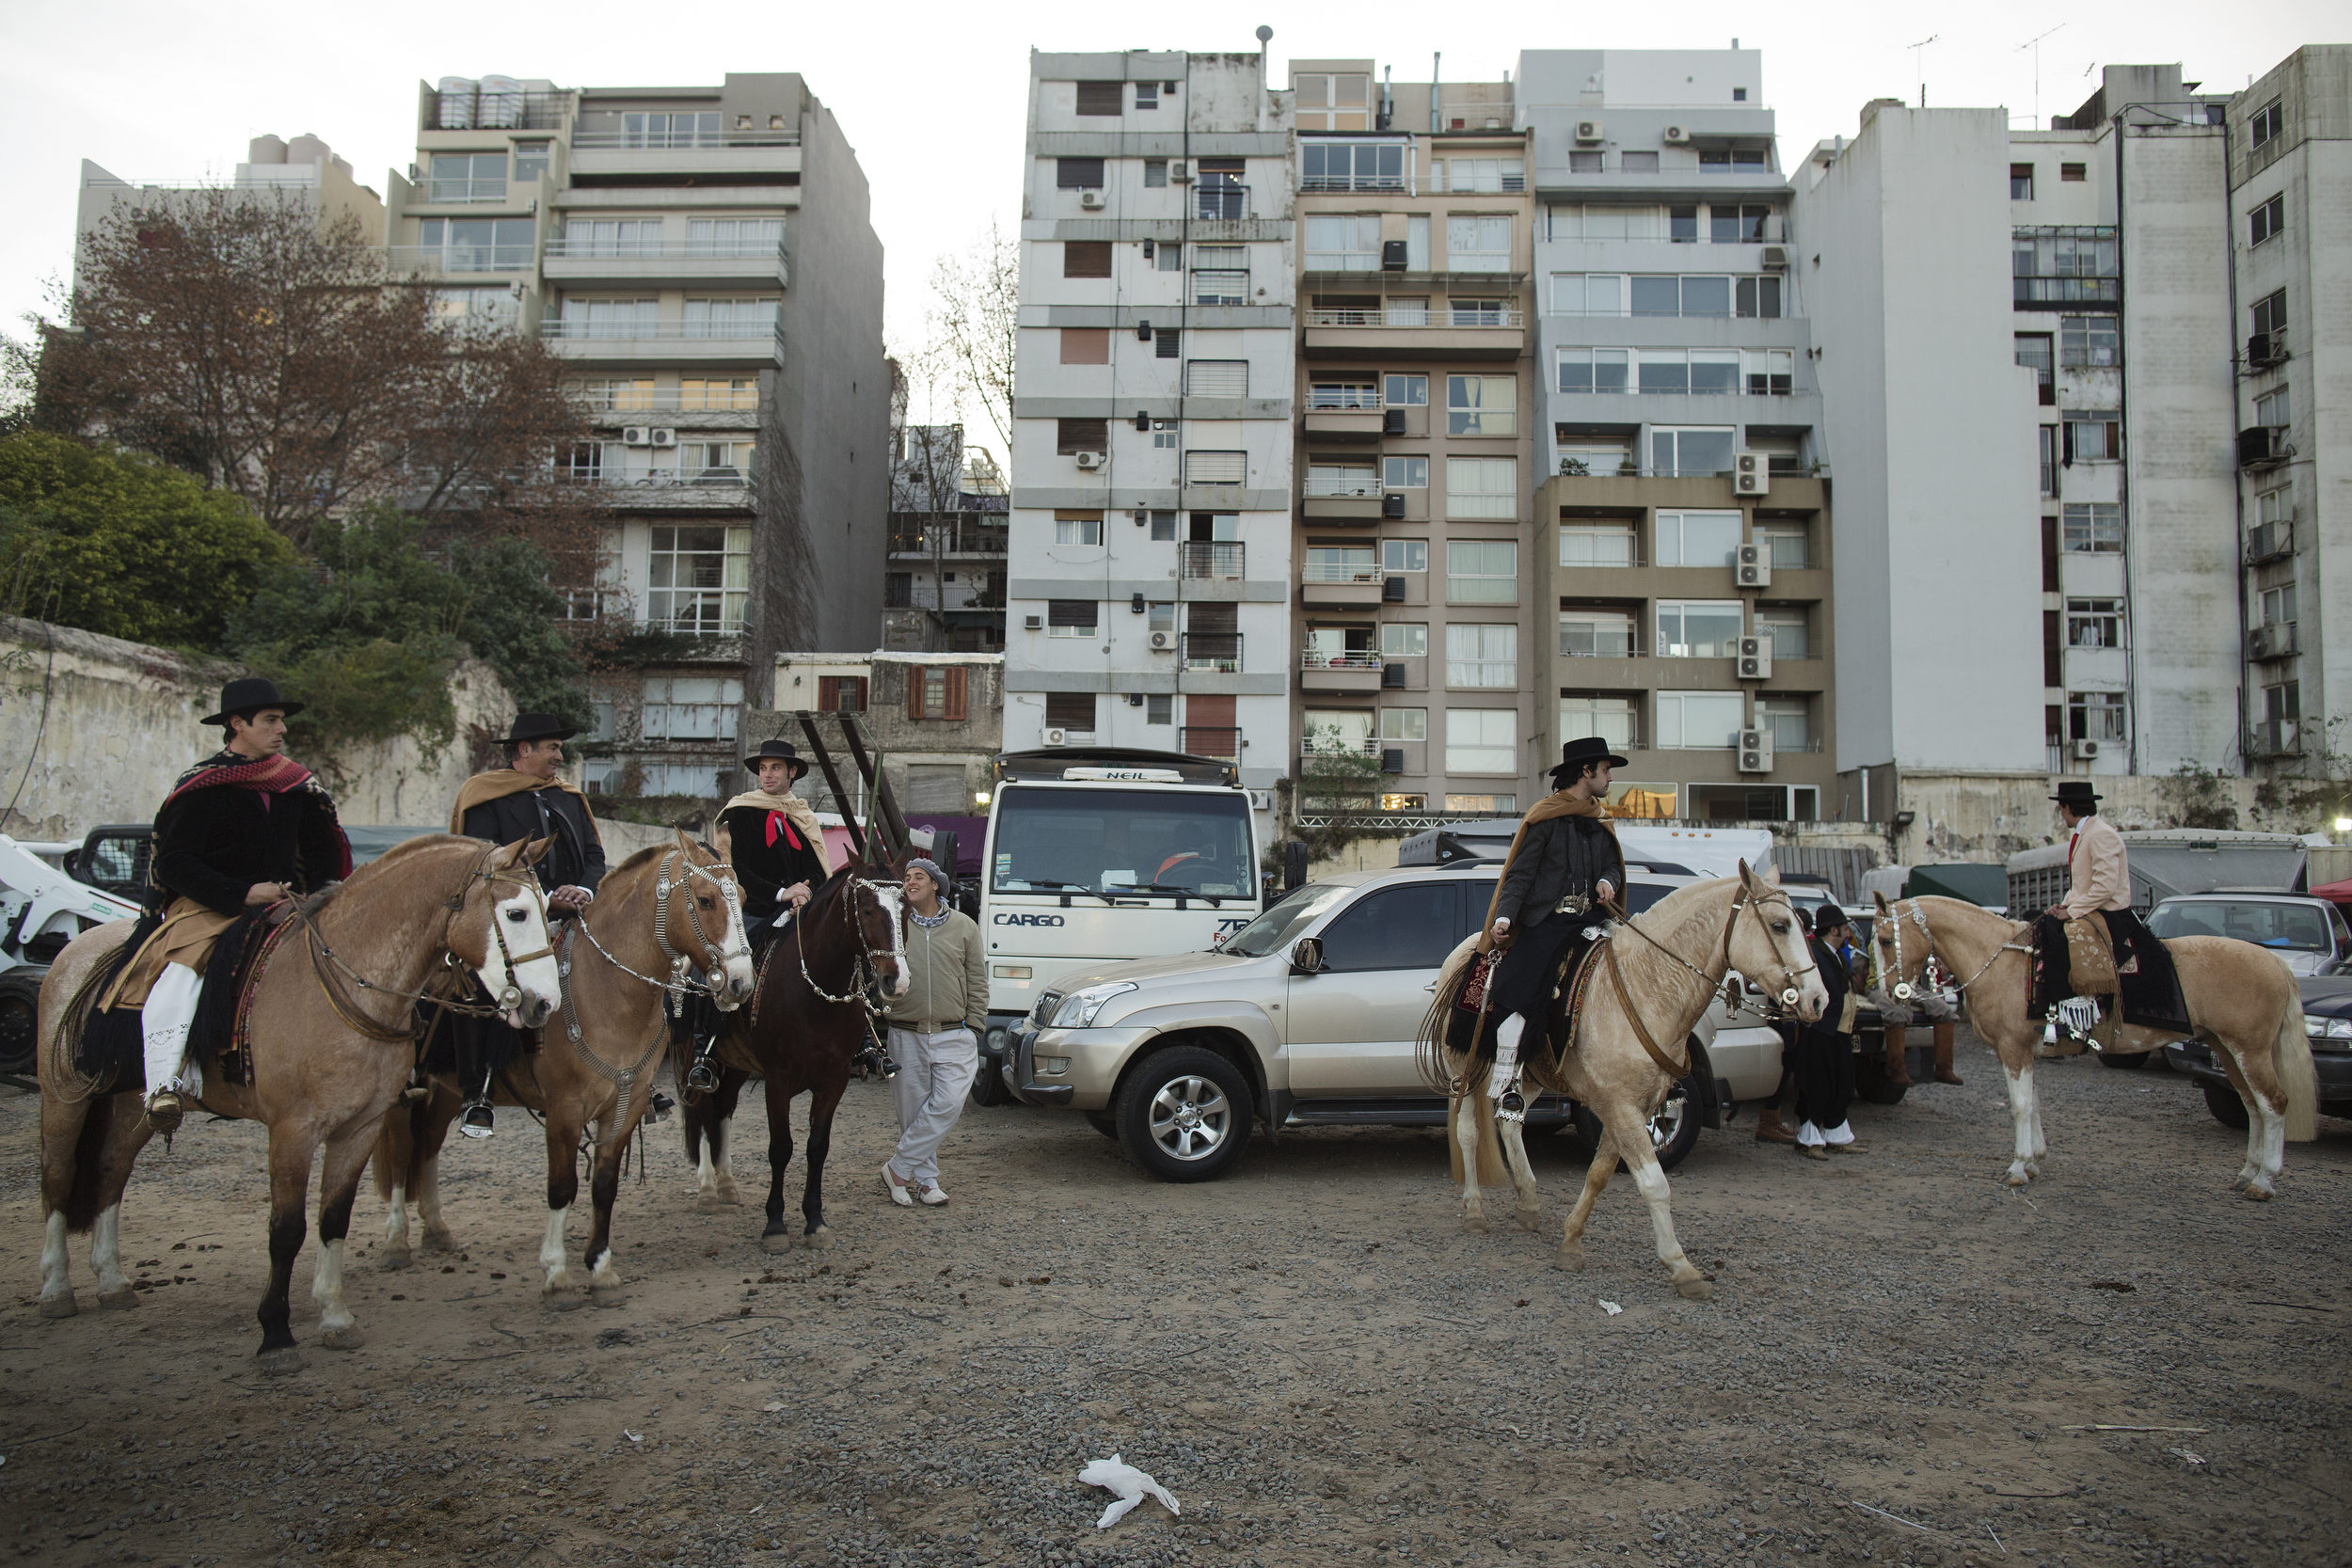  Pablo and a team of riders prepare to enter the ring in a suburb behind the Rural. 